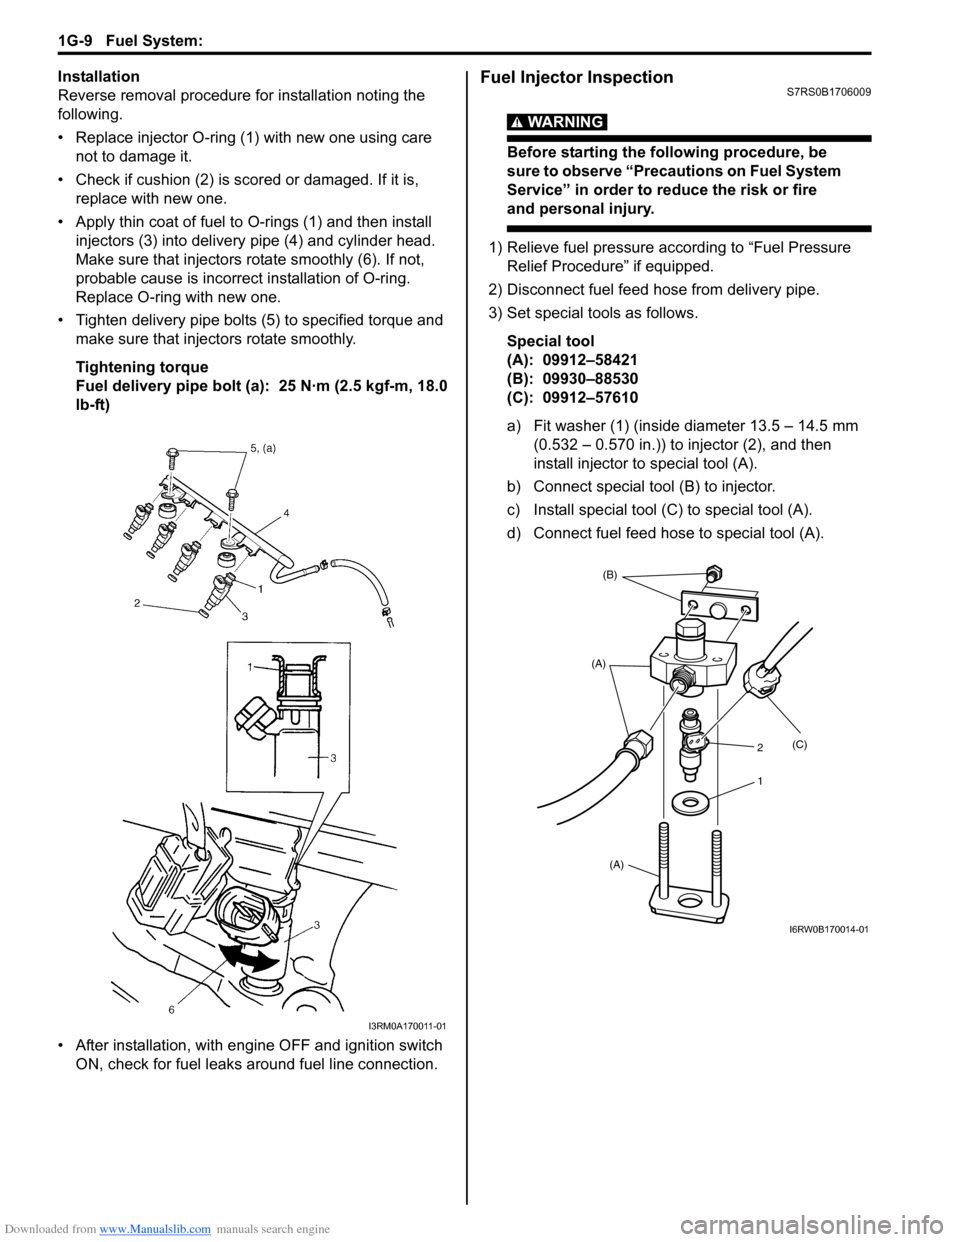 SUZUKI SWIFT 2008 2.G Service Workshop Manual Downloaded from www.Manualslib.com manuals search engine 1G-9 Fuel System: 
Installation
Reverse removal procedure for installation noting the 
following.
• Replace injector O-ring (1) with new one 